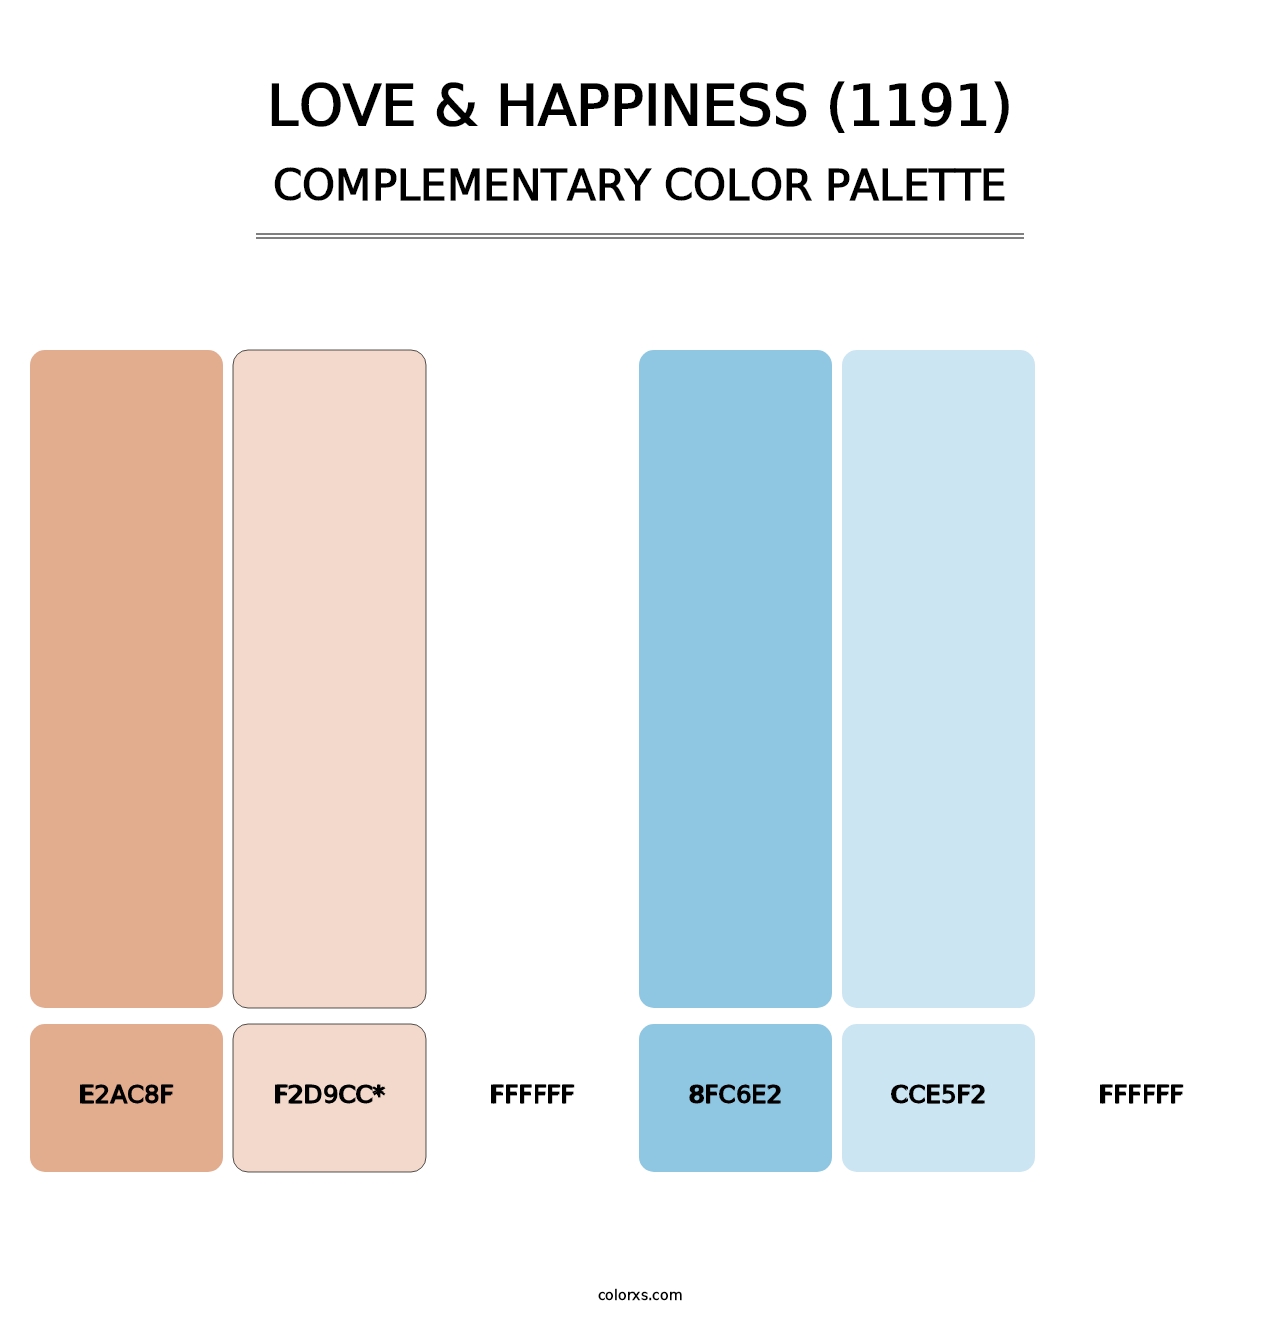 Love & Happiness (1191) - Complementary Color Palette